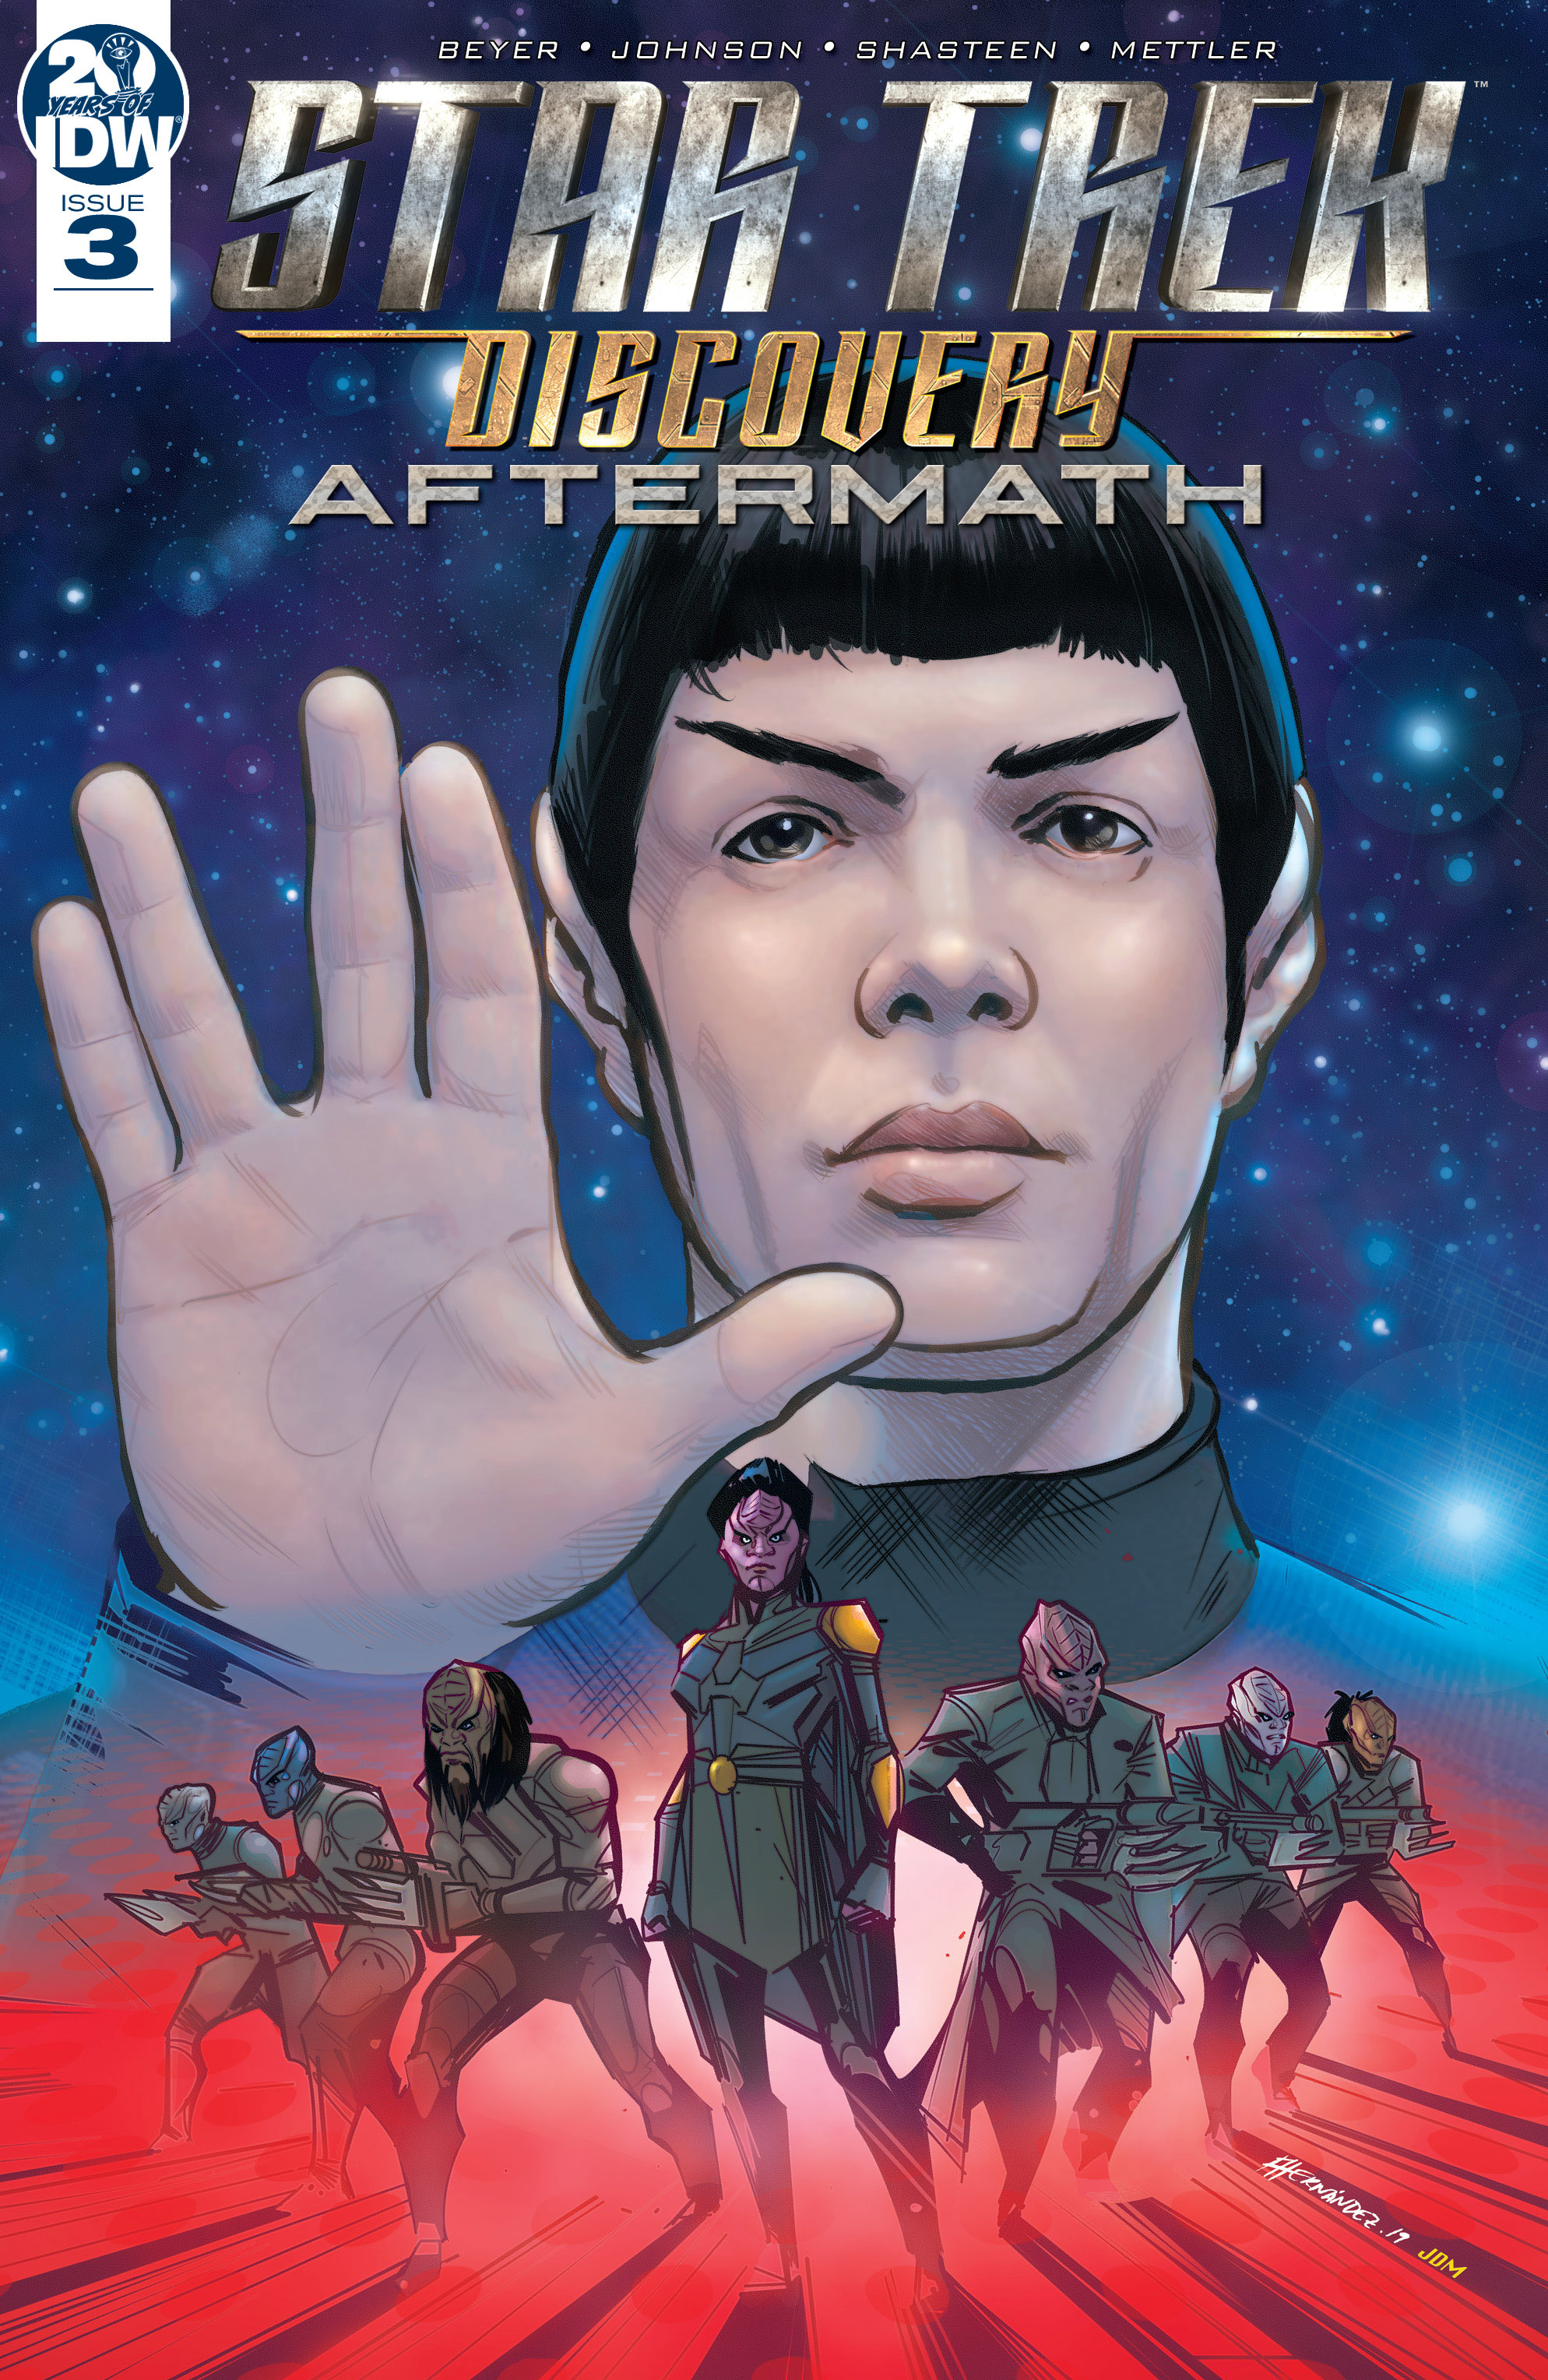 Read online Star Trek: Discovery - Aftermath comic -  Issue #3 - 1